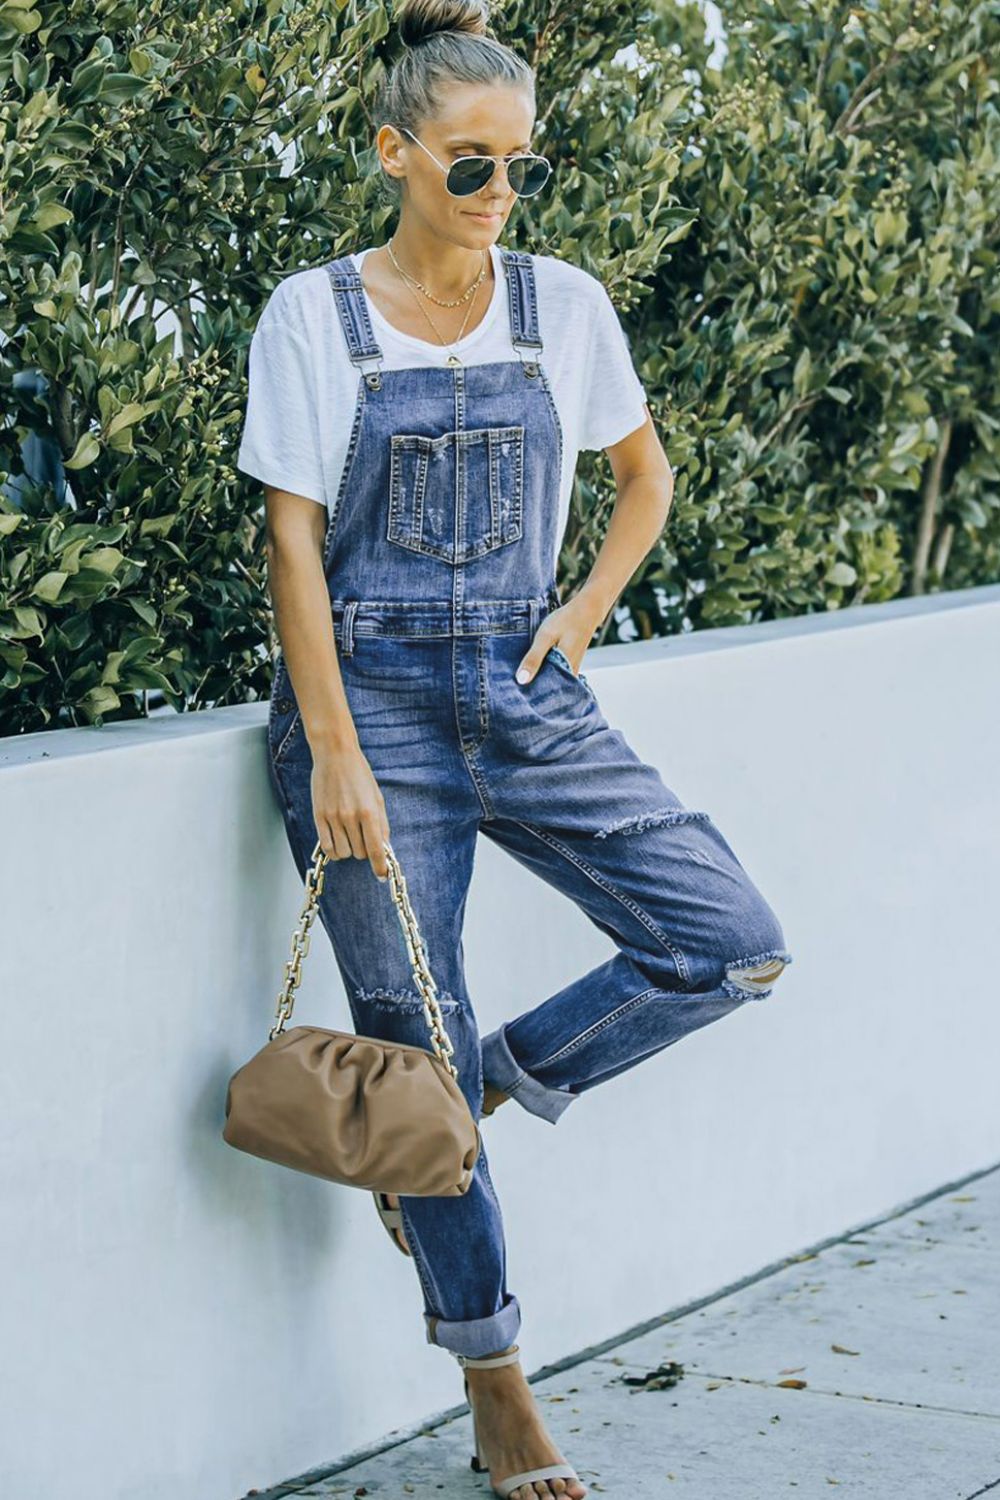 Women's Pocketed Distressed Denim Overalls